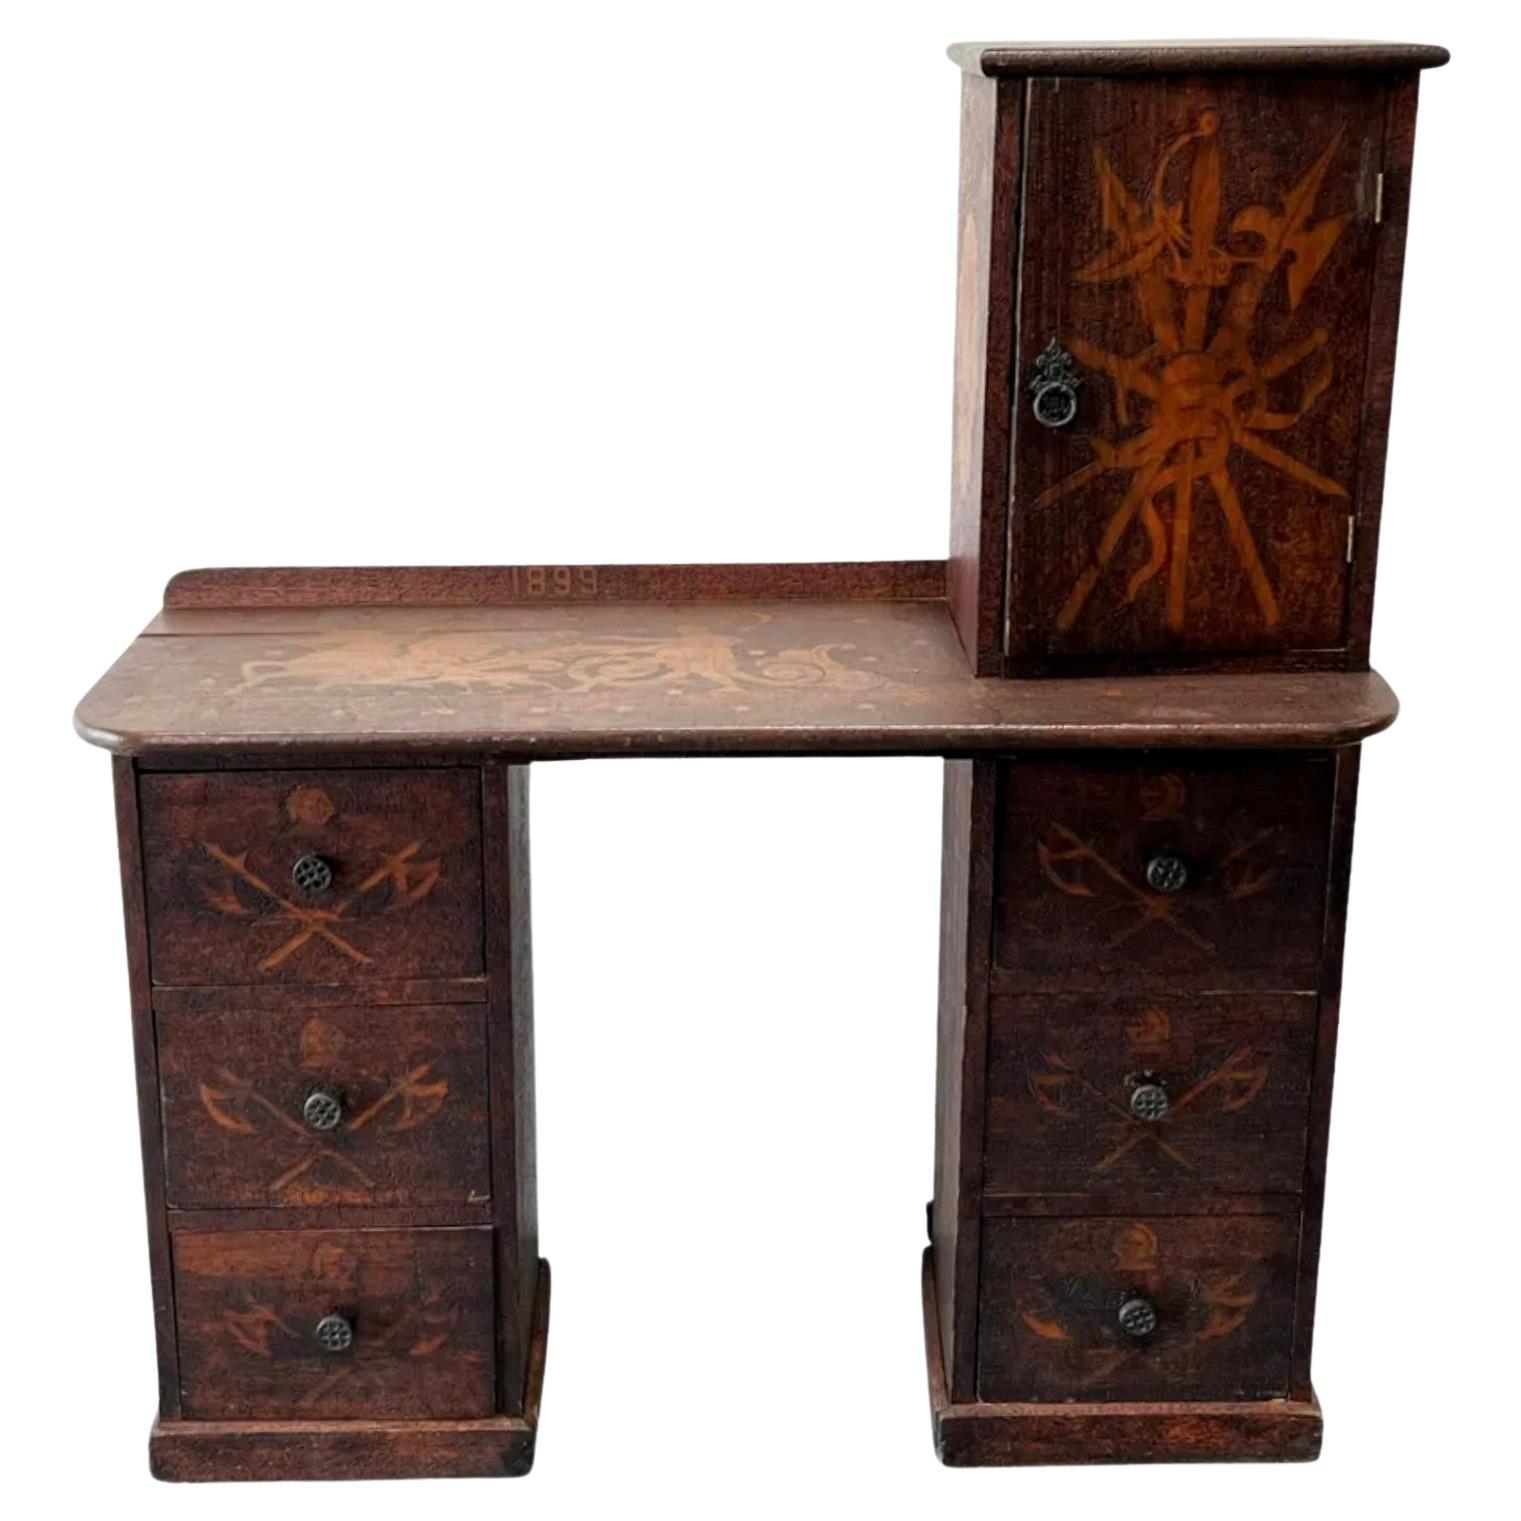 Rare Early American Country Pyrography Desk